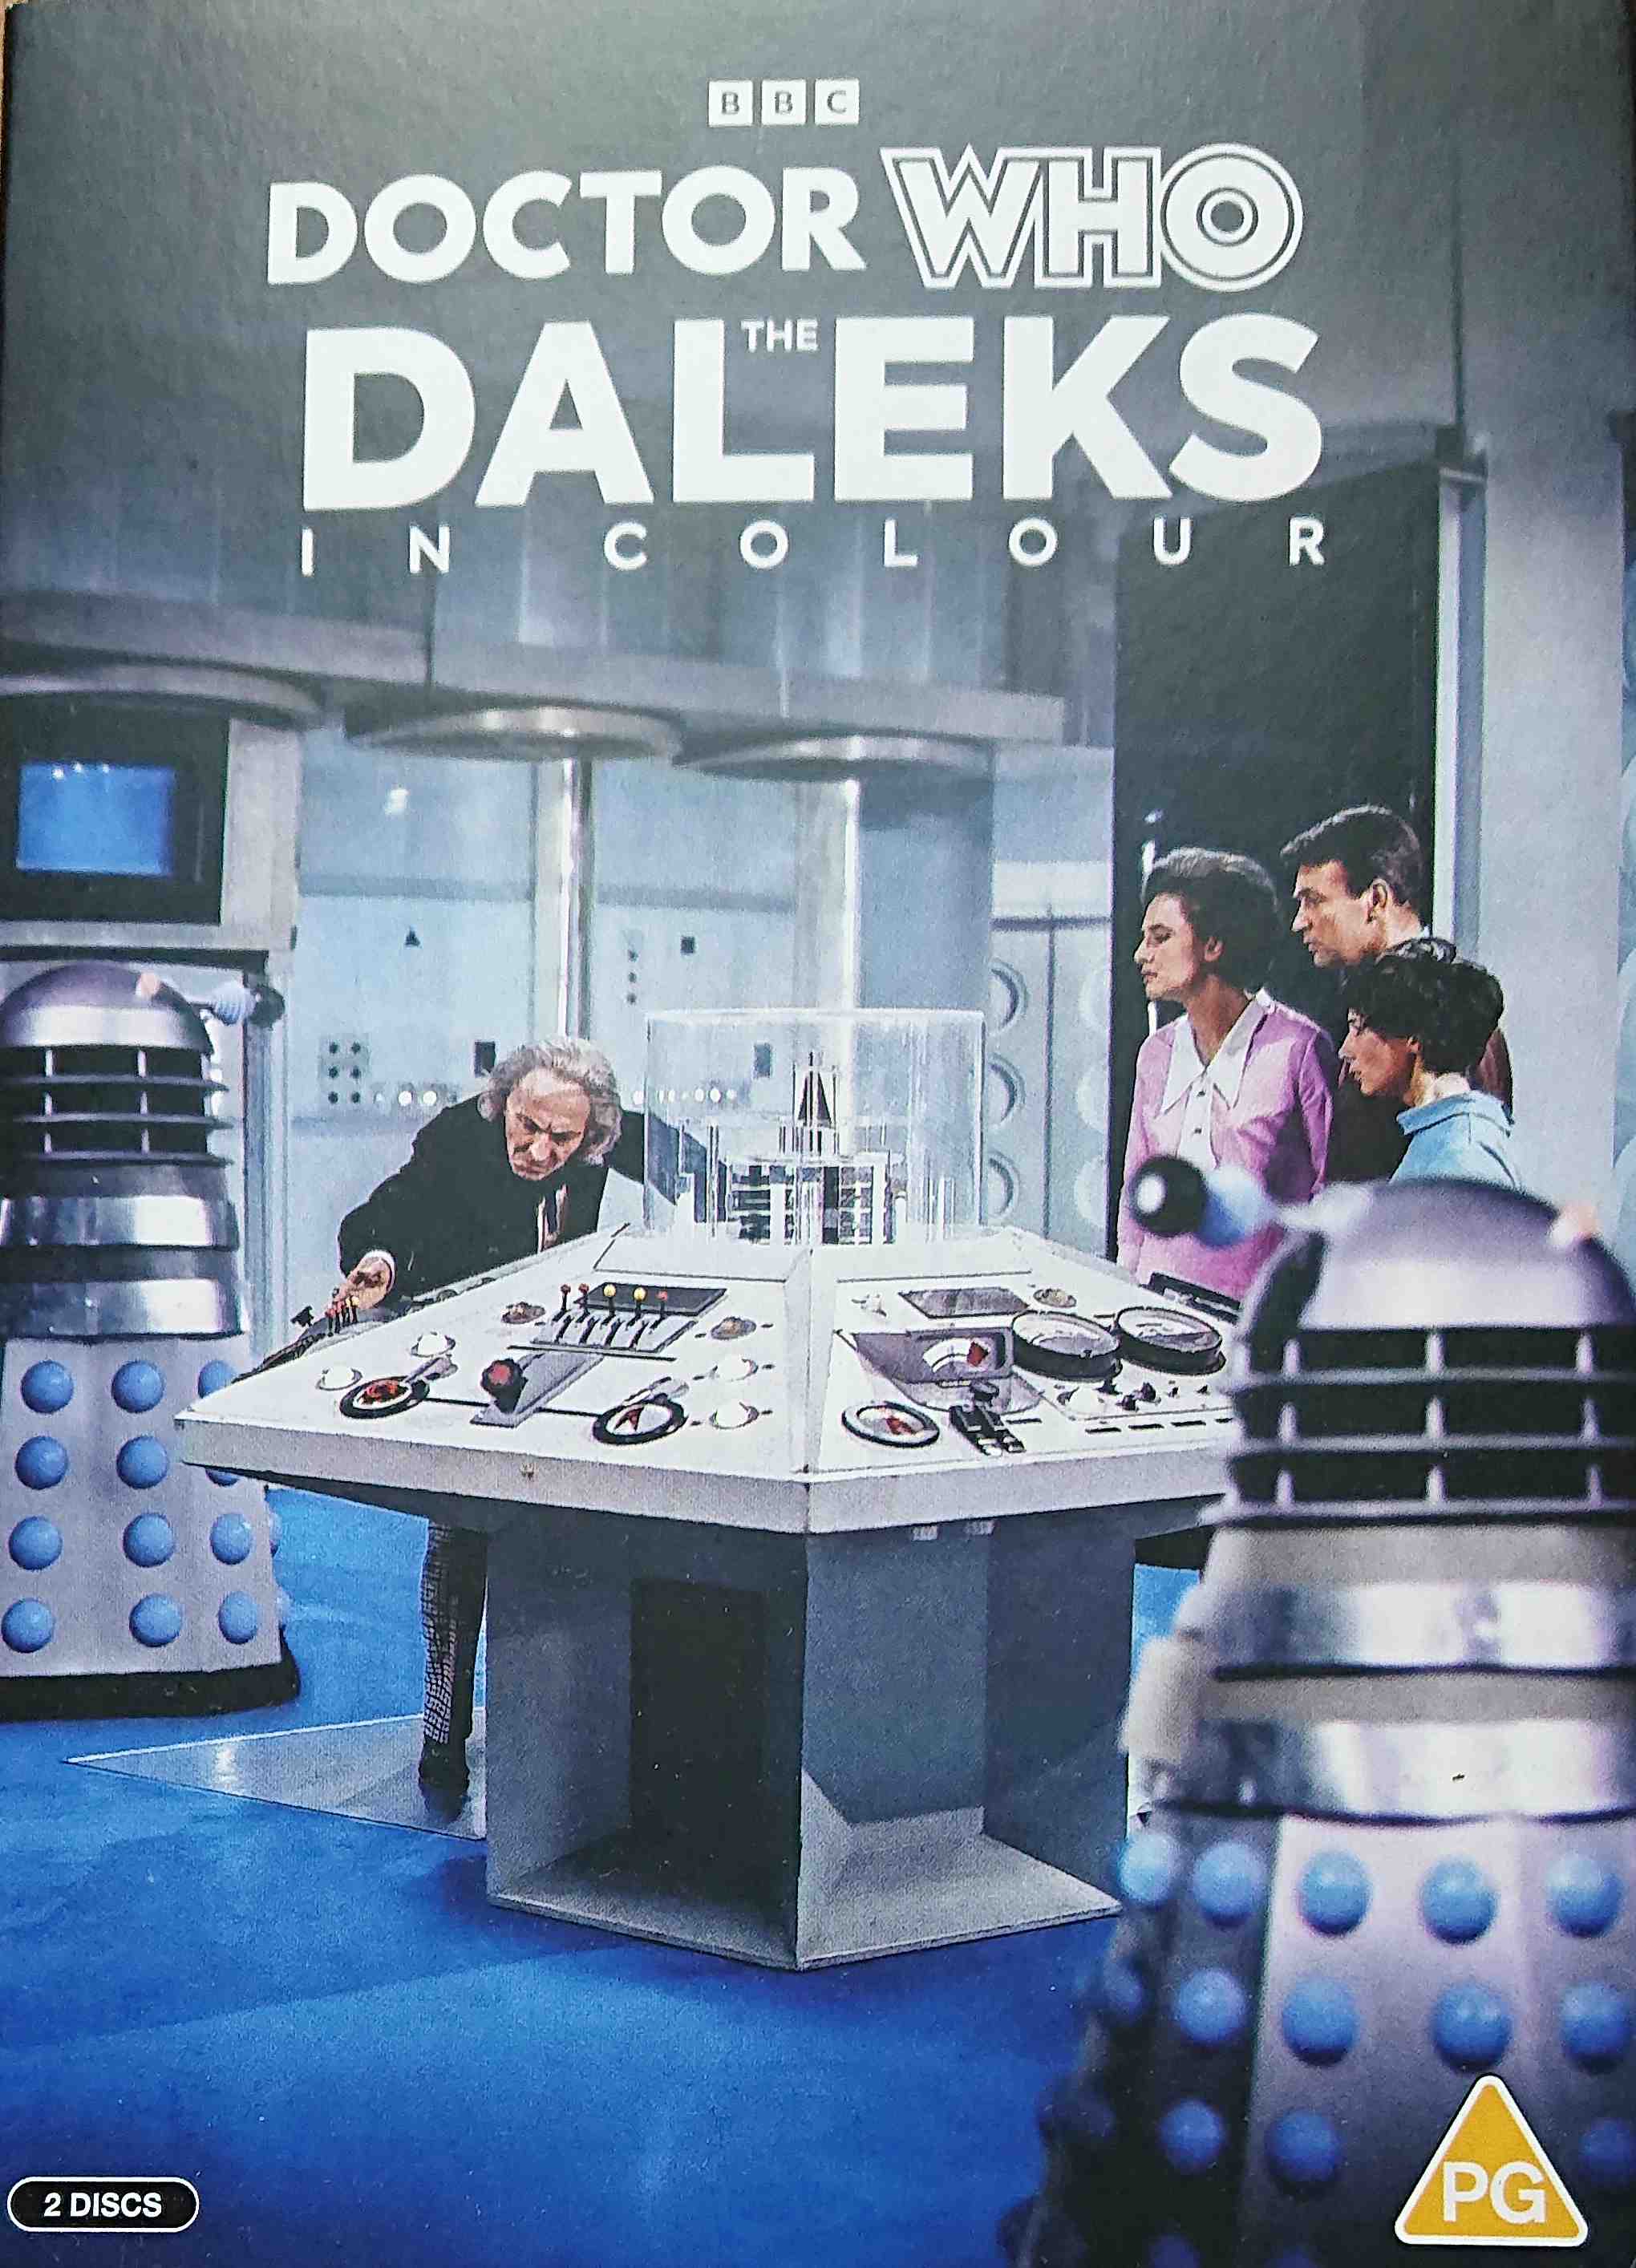 Picture of BBCDVD 4580 Doctor Who - The Daleks - In colour by artist Terry Nation from the BBC records and Tapes library